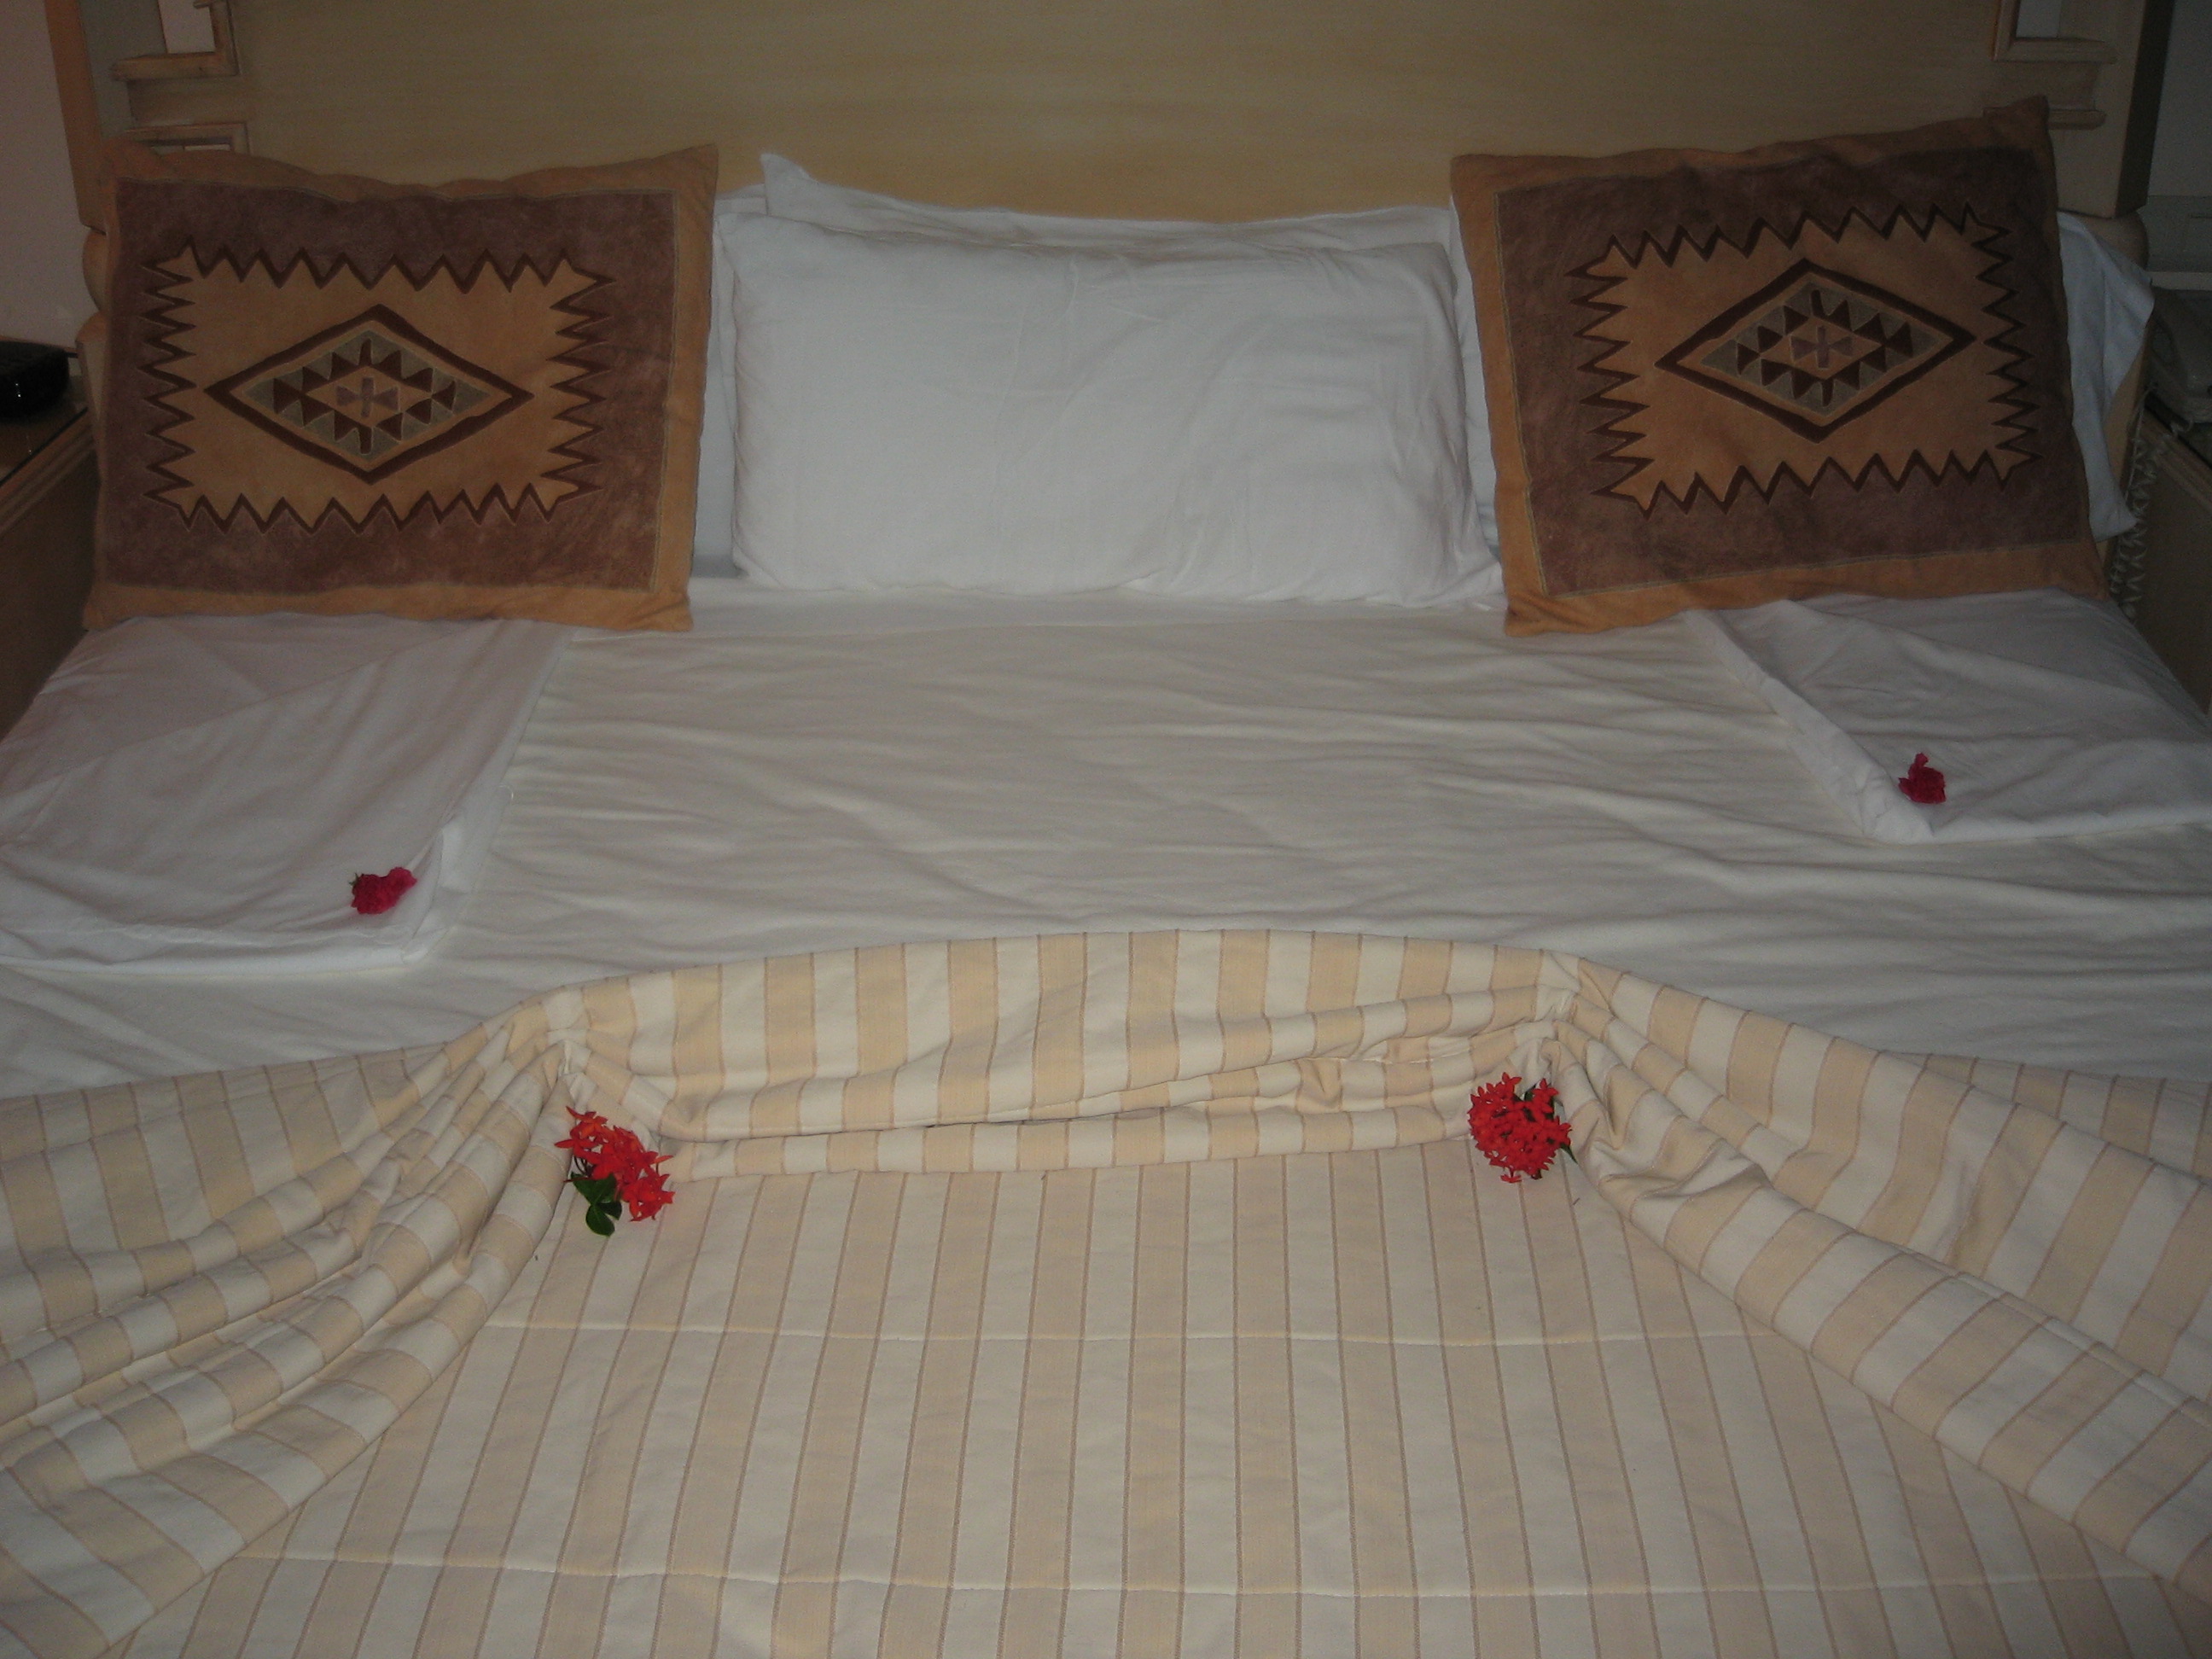 bed turned down with flowers